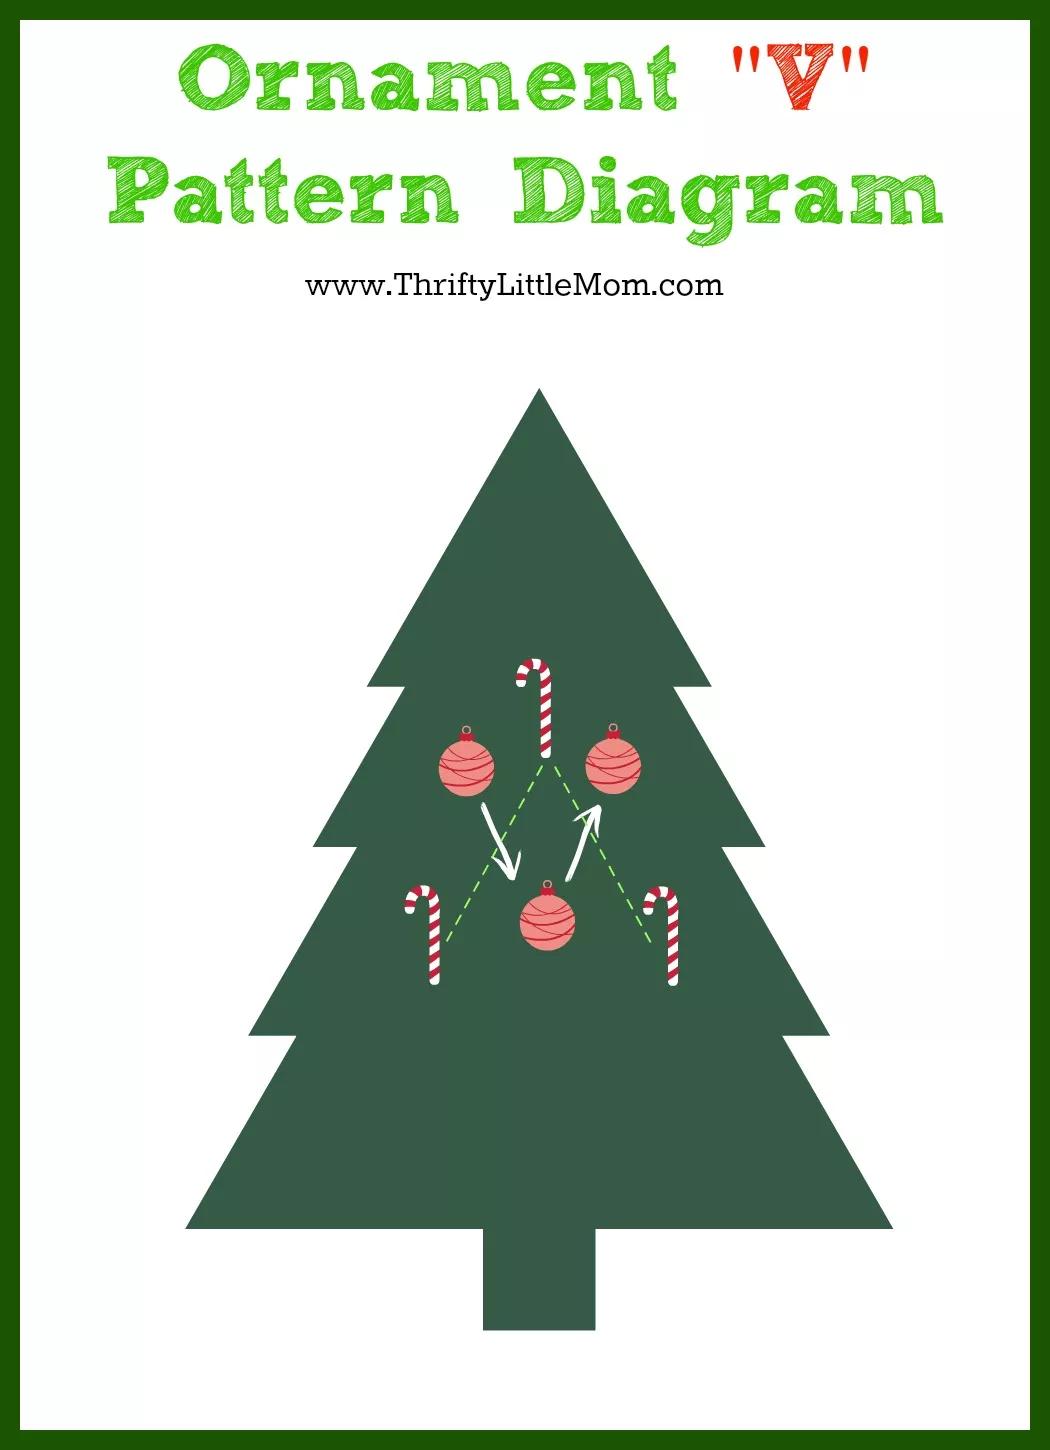 How To Trim Your Tree Like the Magazines Ornament Pattern